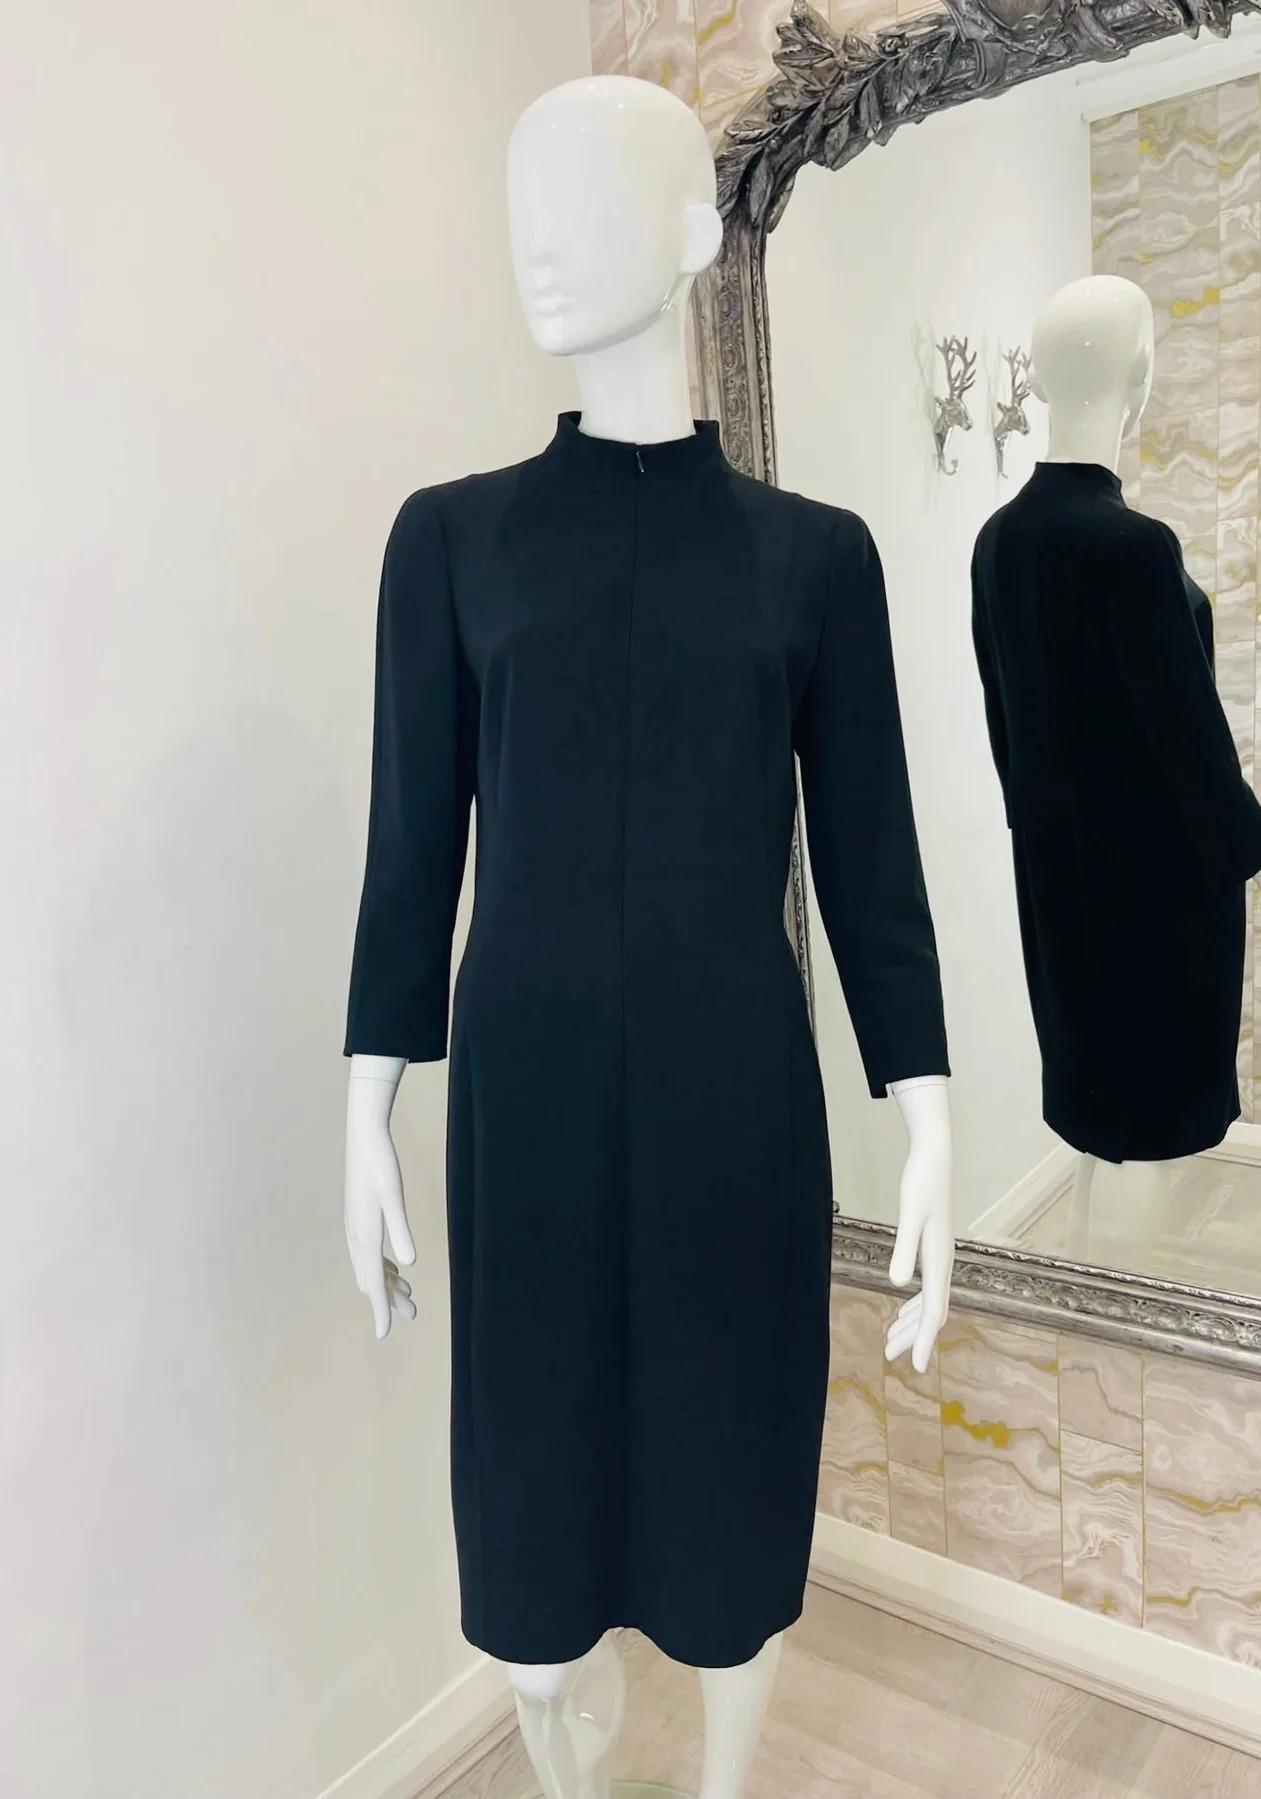 Akris Wool Dress

Black dress with high neck, vented 3/4 sleeves and zipper to the front.

Additional information:
Size – 42FR
Composition – 99% Wool, Lining 90% Silk 
Condition – Very Good